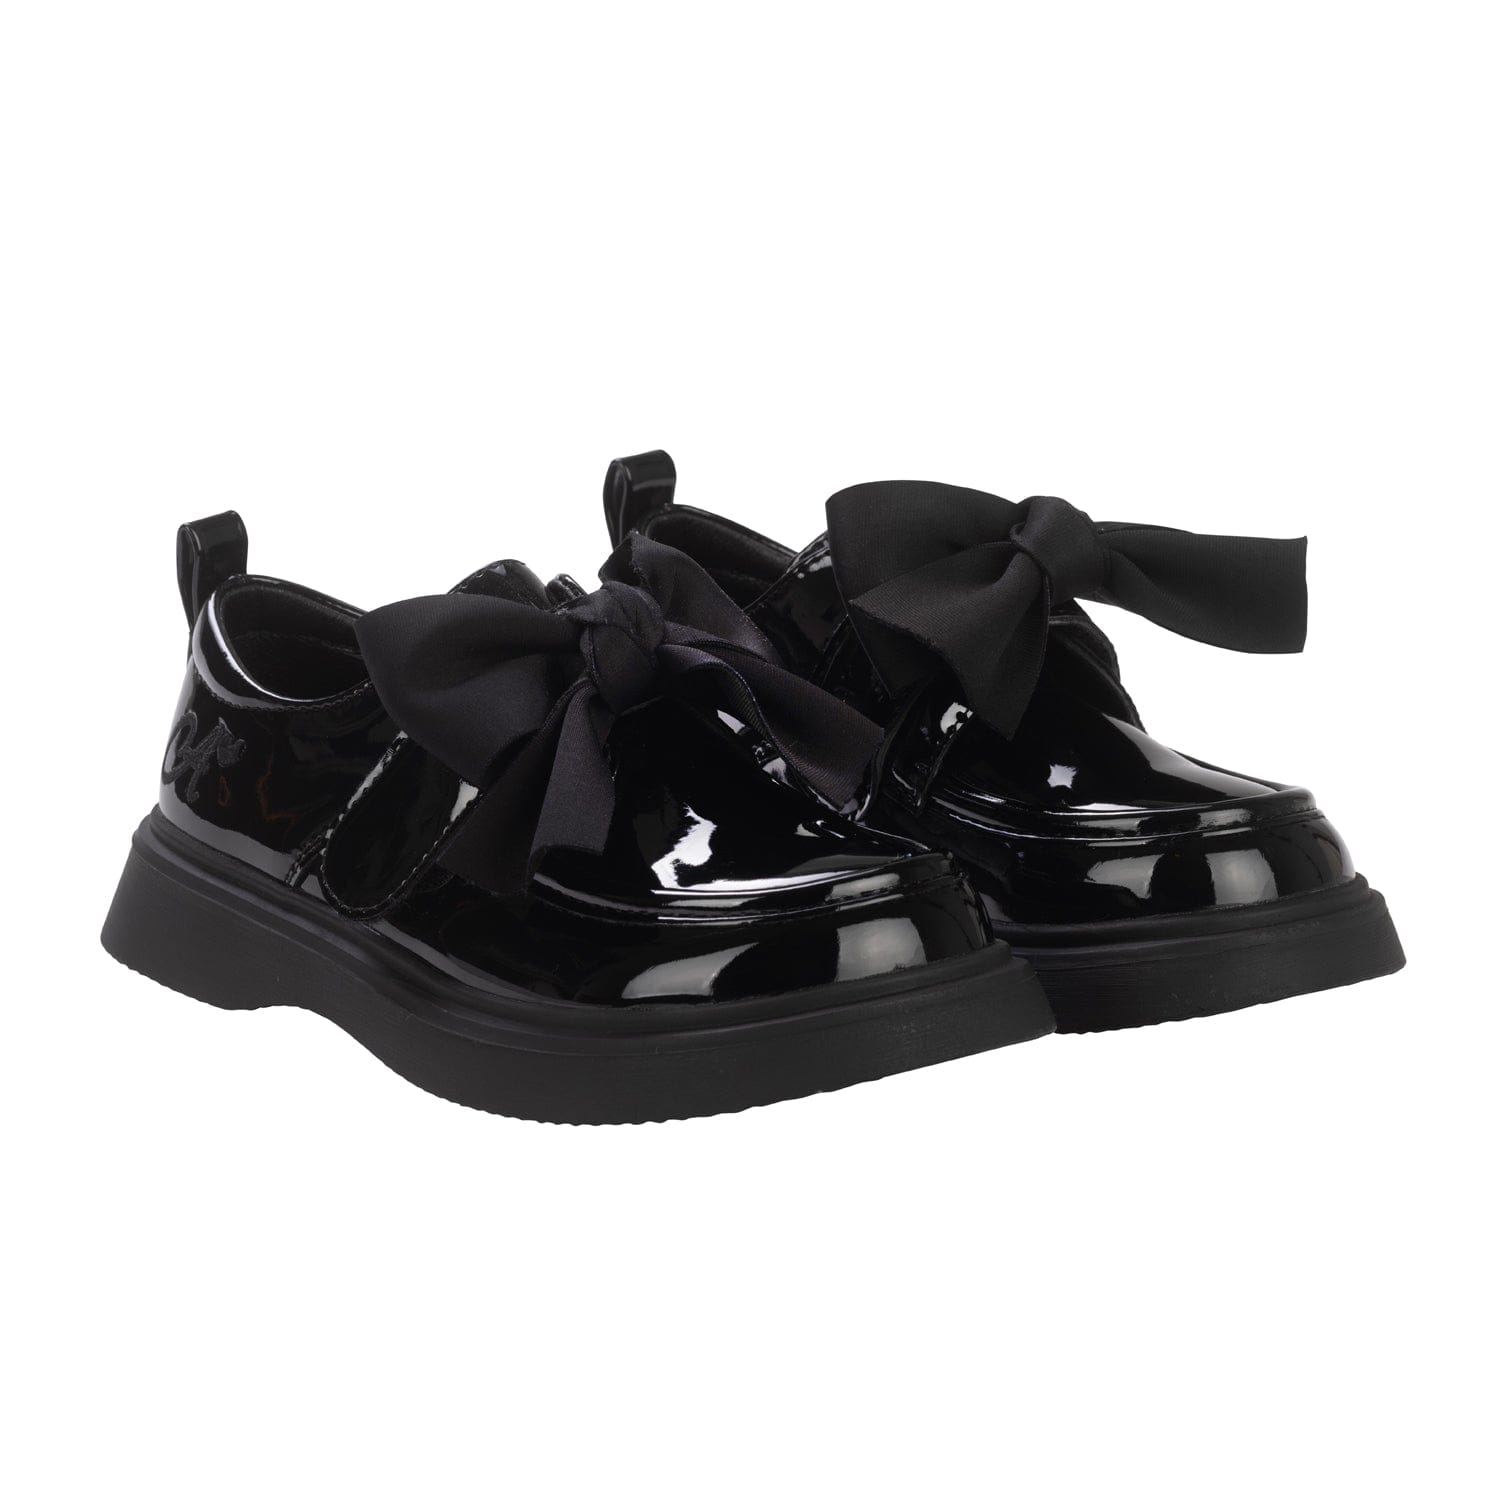 A DEE - Back To School Mary Bow Shoe - Black